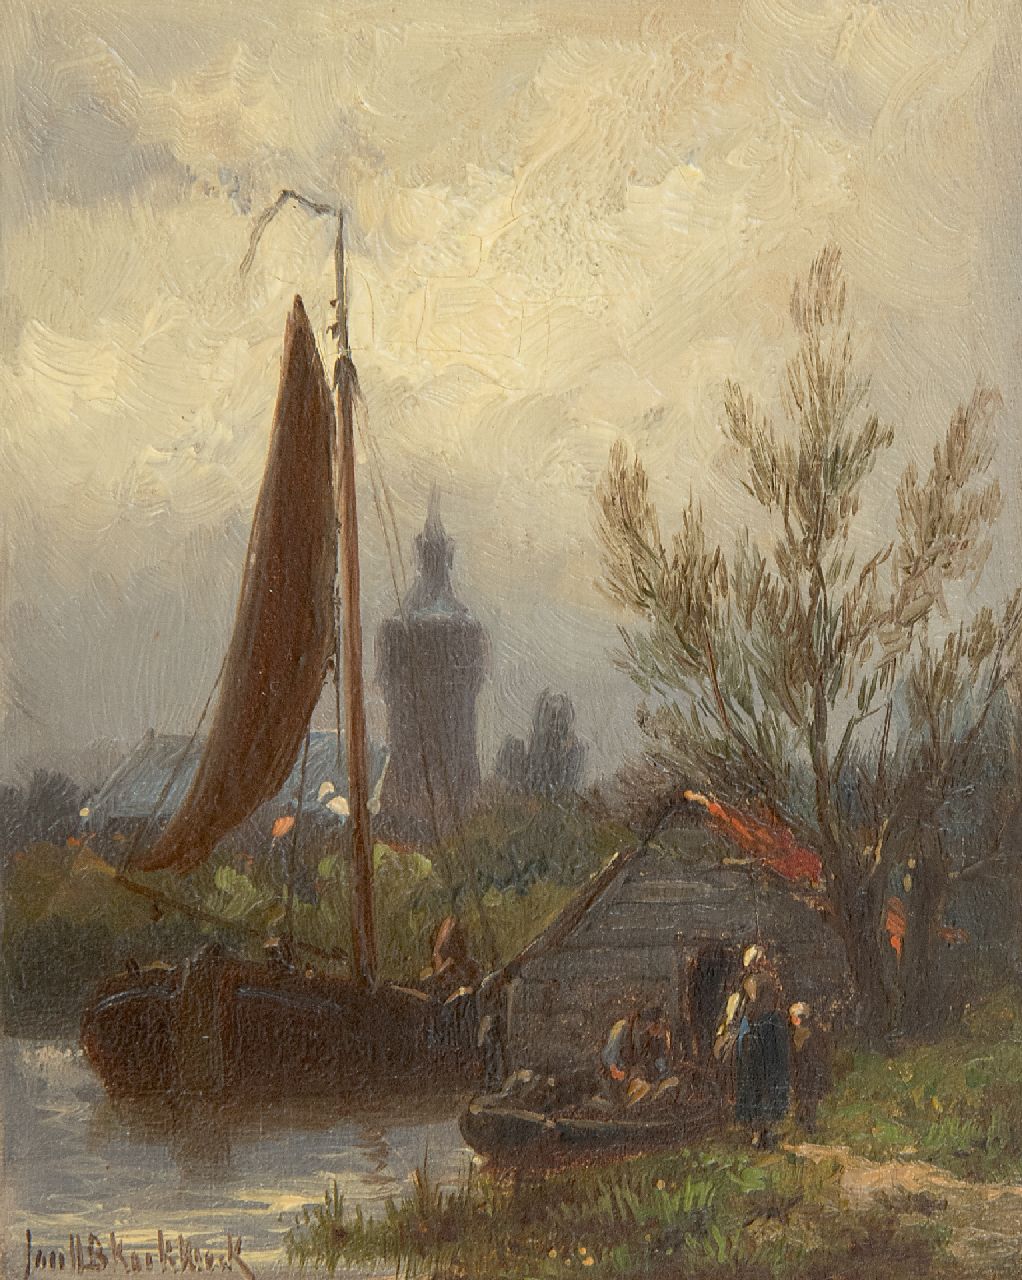 Koekkoek J.H.B.  | Johannes Hermanus Barend 'Jan H.B.' Koekkoek | Paintings offered for sale | A canal with barges and figures, oil on panel 11.4 x 9.3 cm, signed l.l.